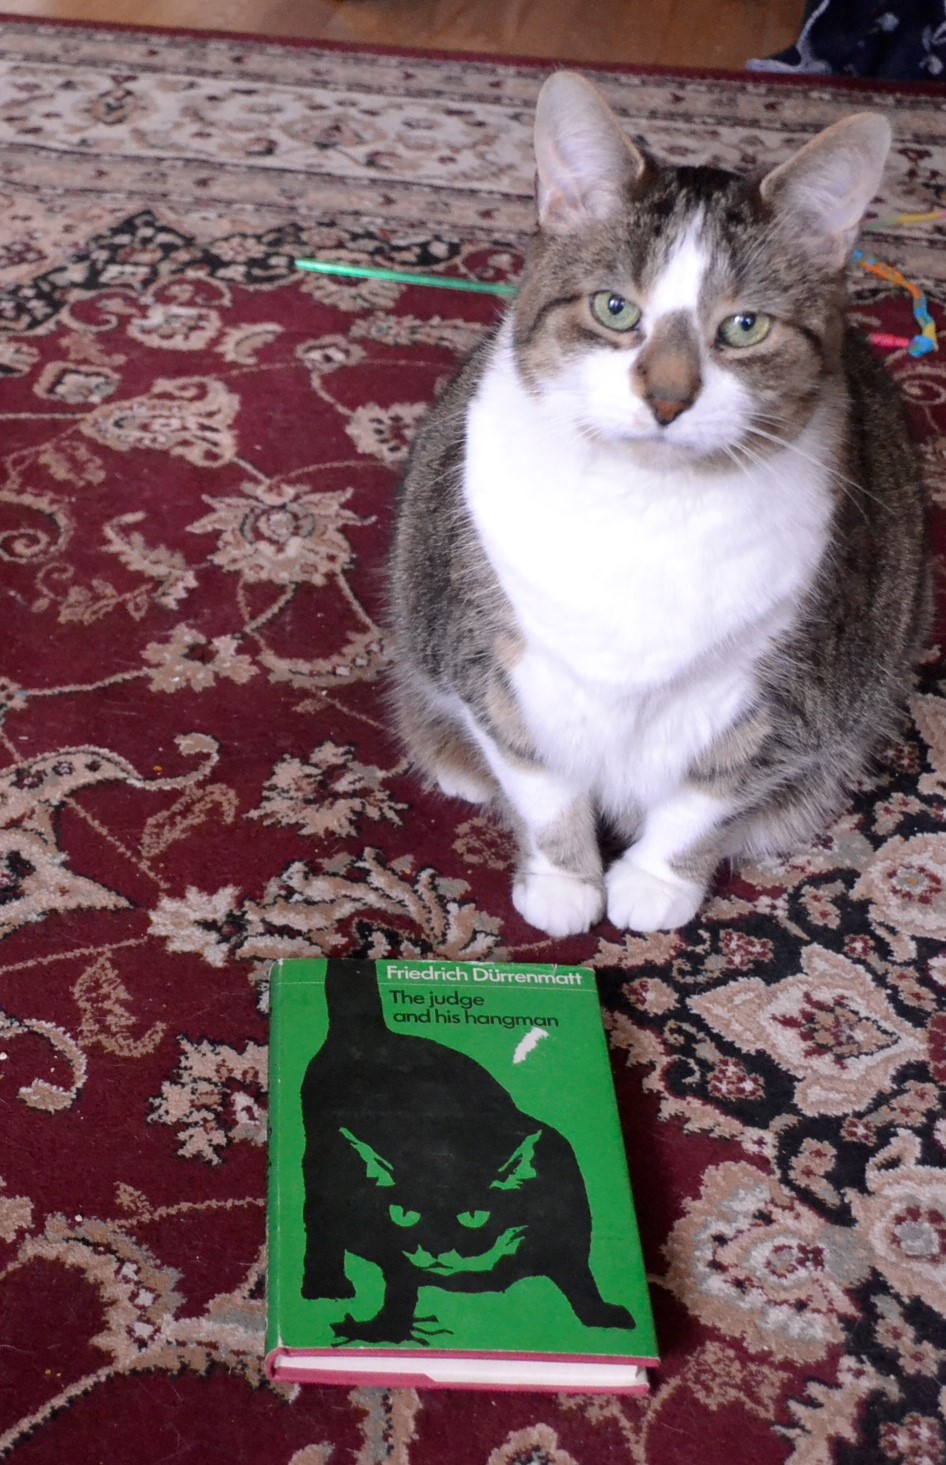 A fawn tabby with a brown nose beside the bright green cover of The Judge and His Hangman.